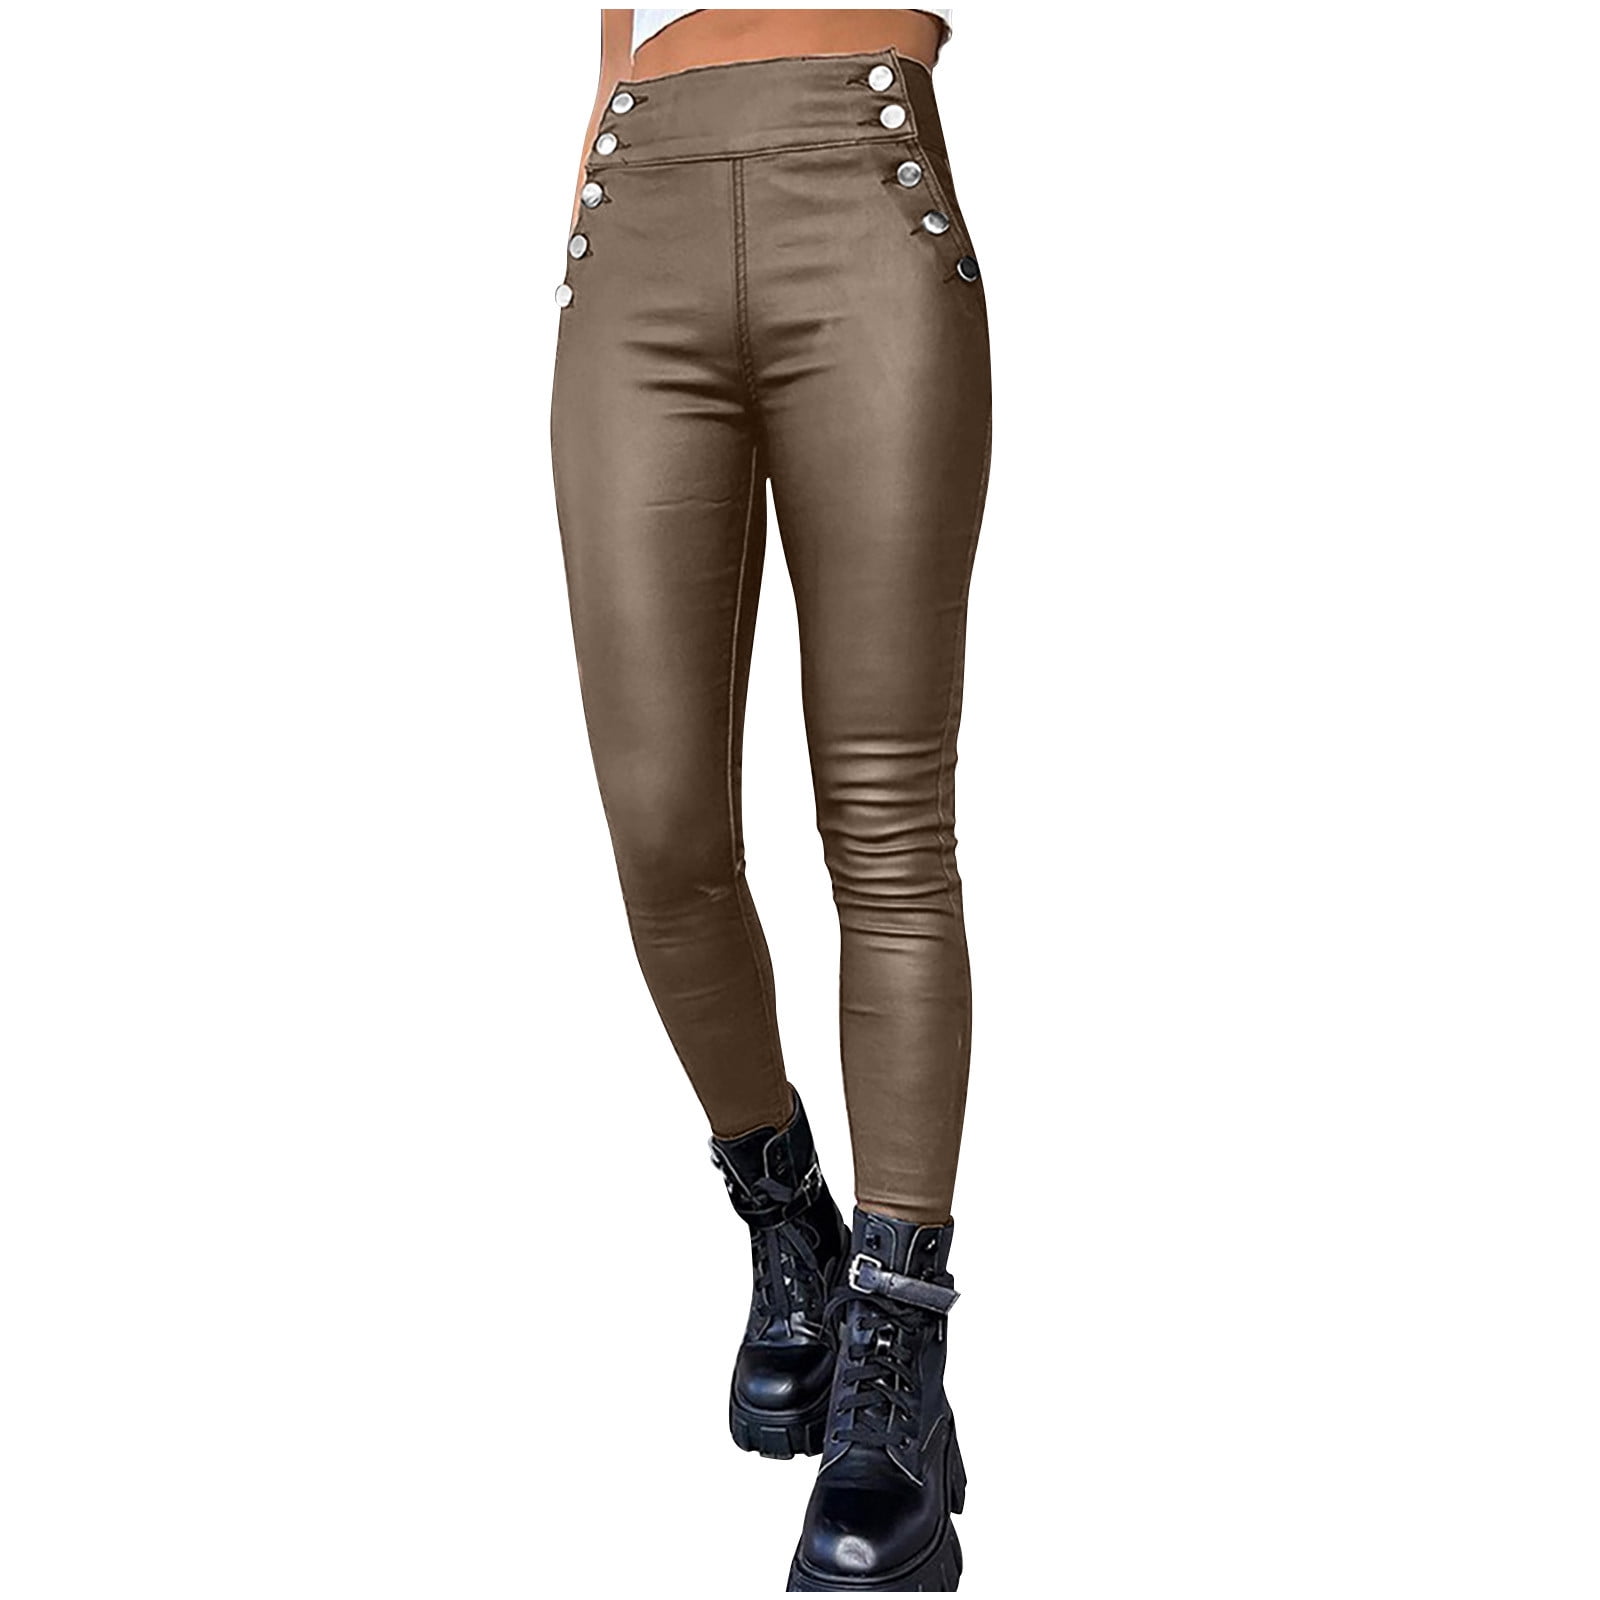 High Waist Black PU Leather High Waisted Leather Leggings For Women Thick  Stretch Trousers For Work And Casual Wear From Gengbao20909222, $10.66